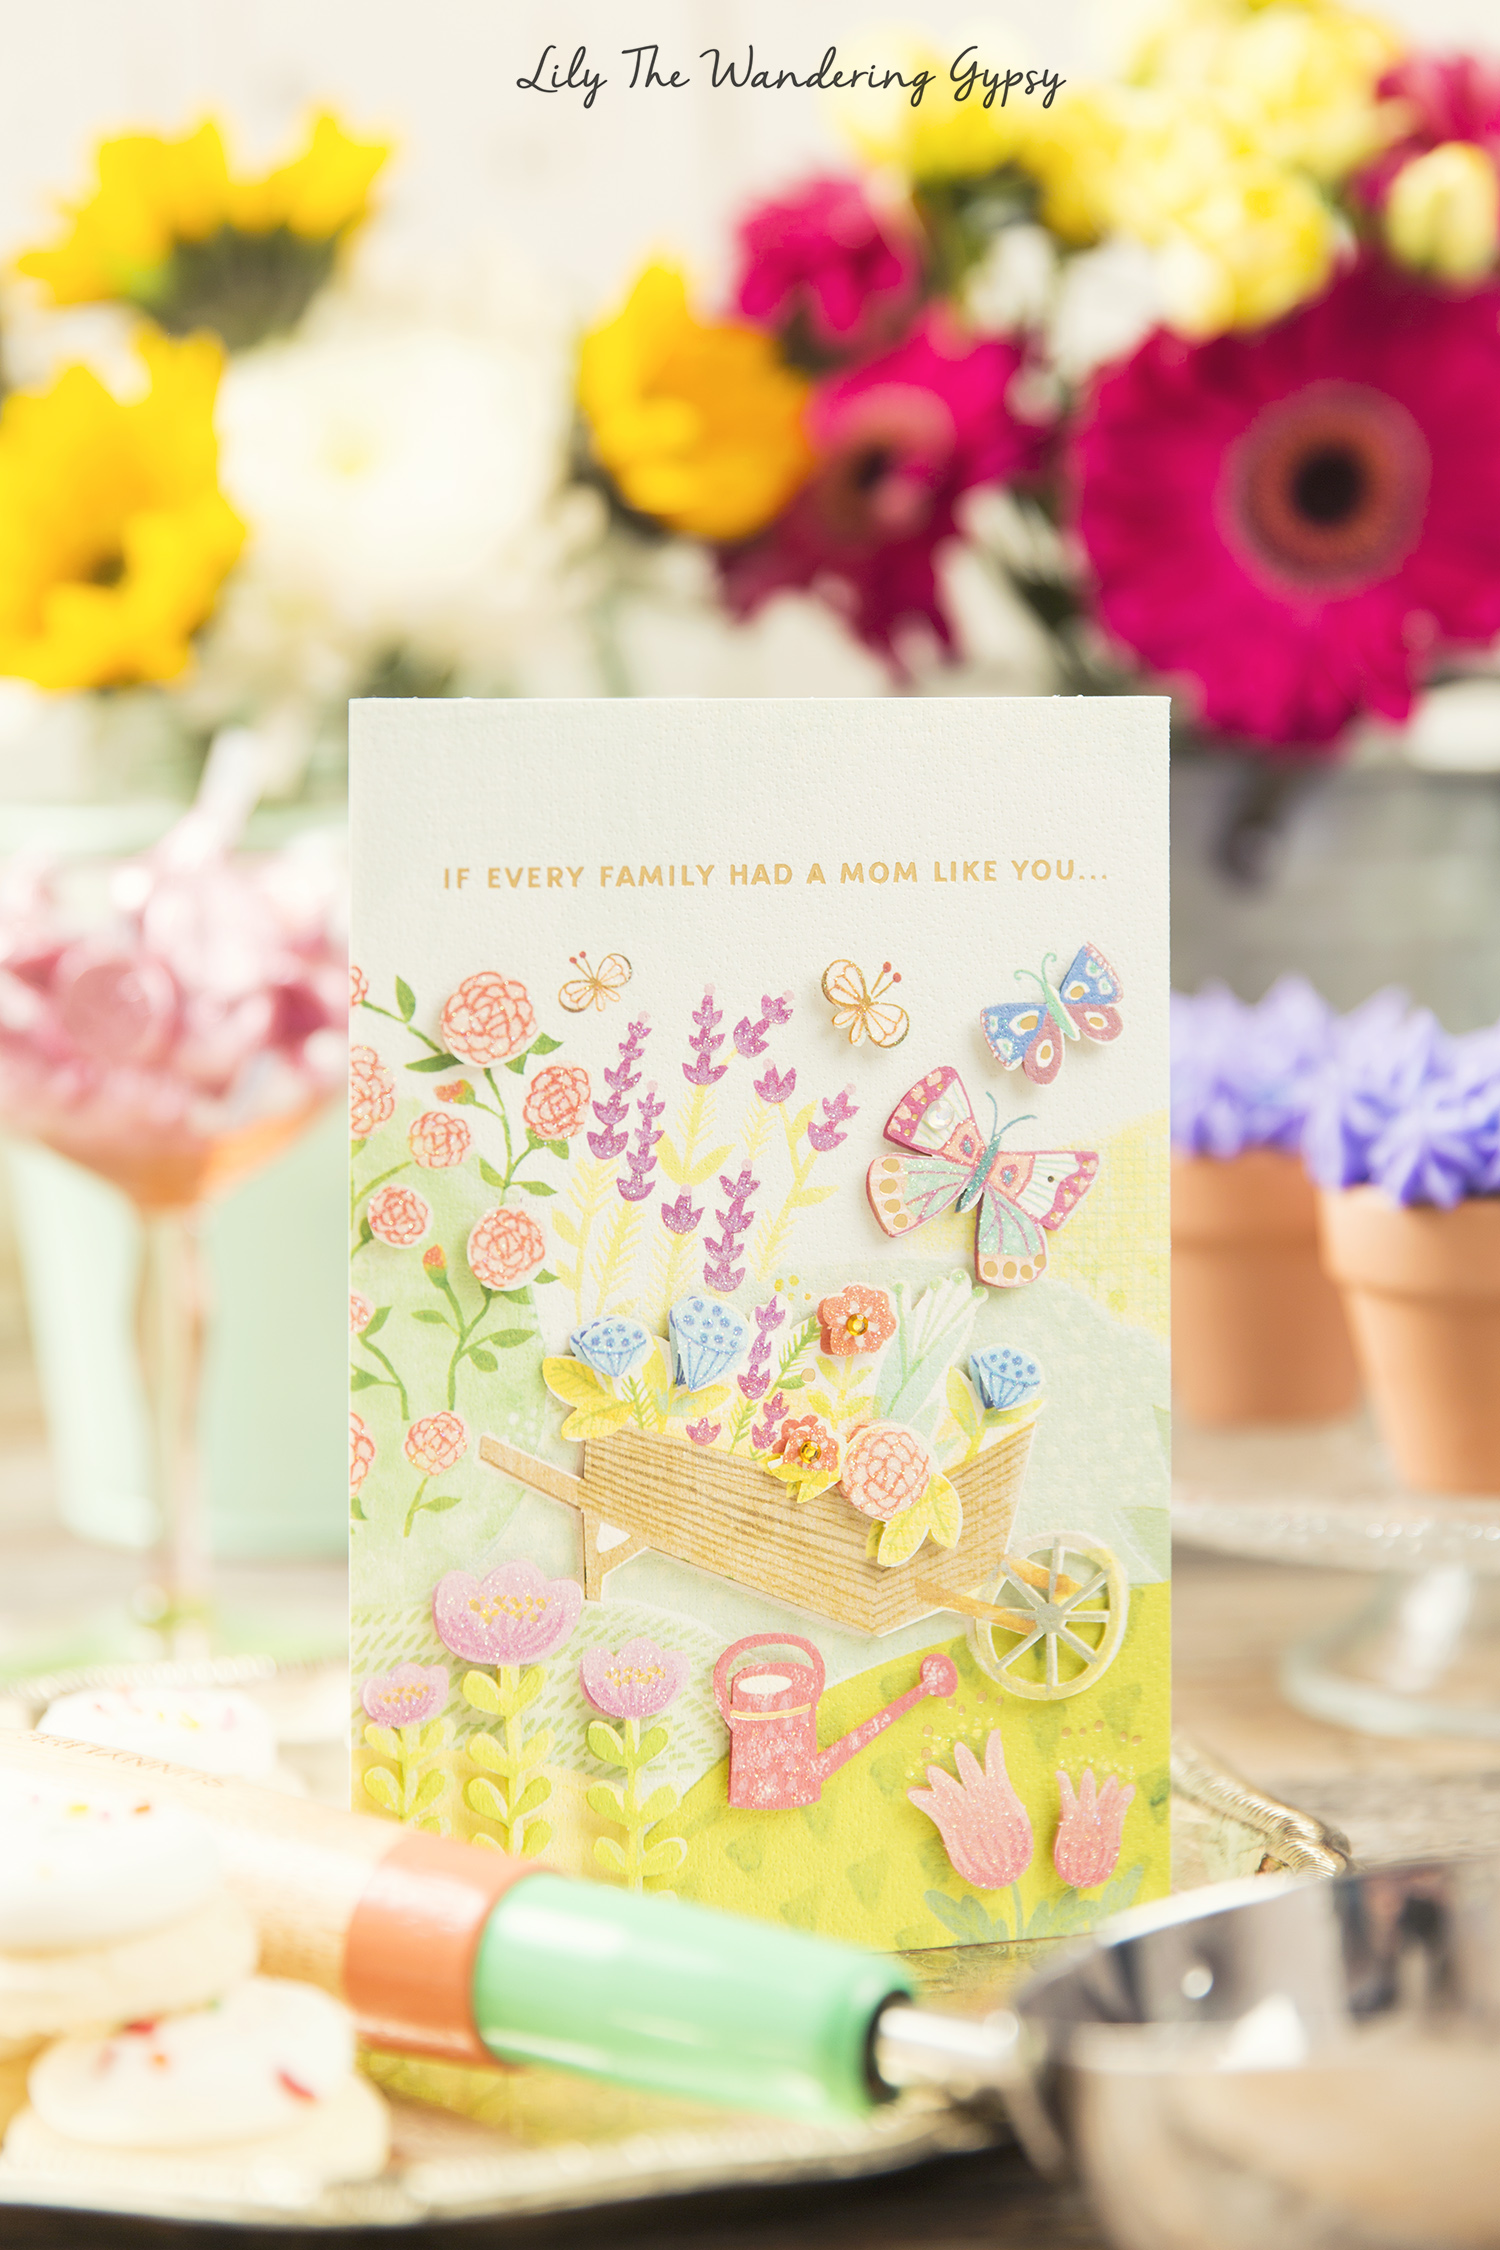 hallmark mother's day gifts